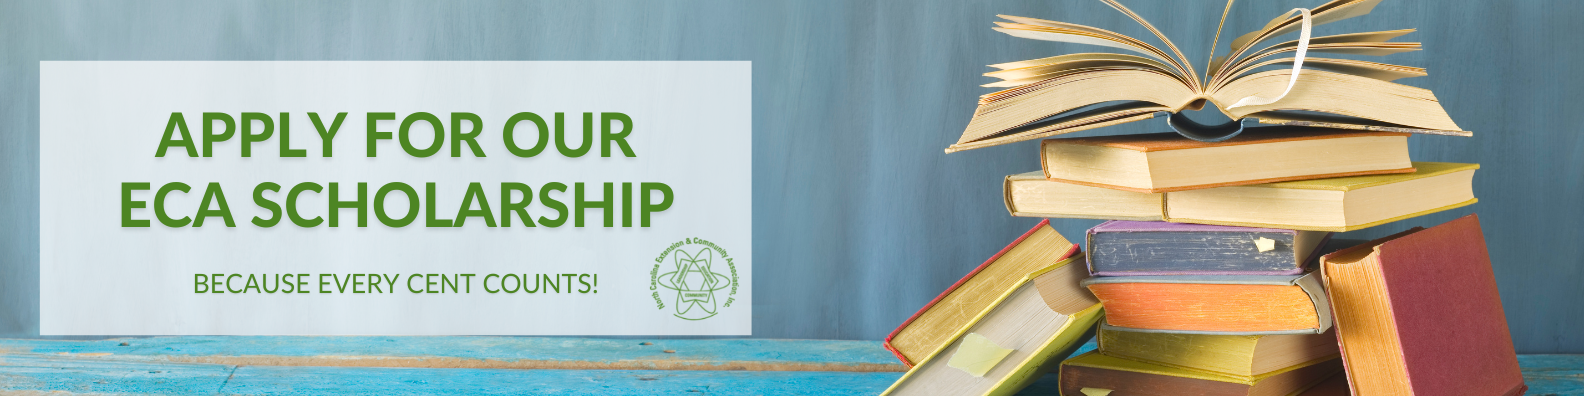 Apply for Our ECA Scholarship banner with pile of books